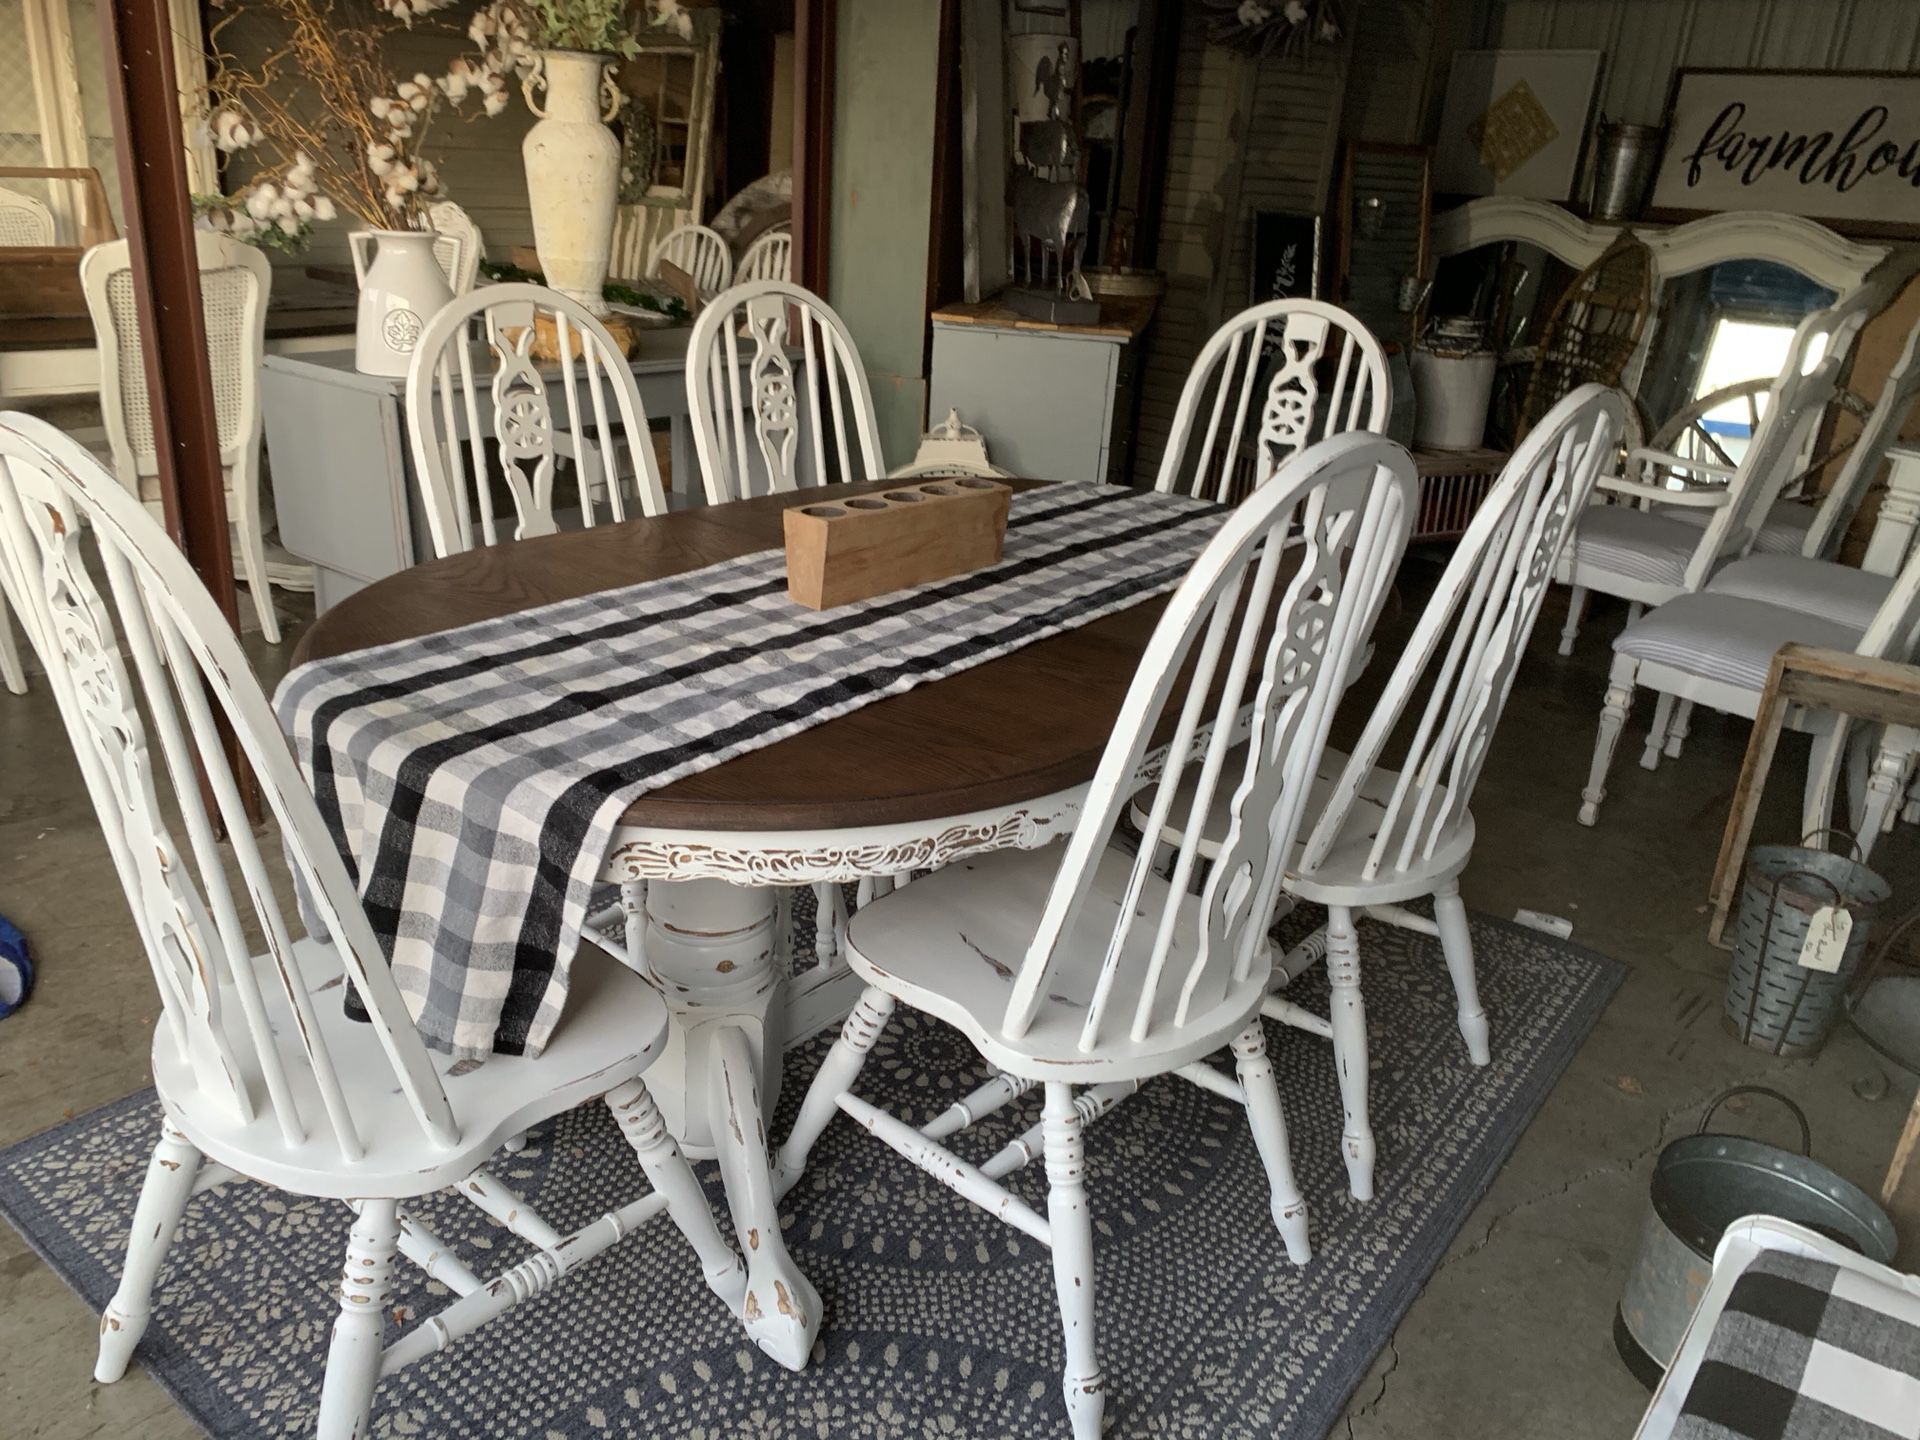 Farmhouse Style Table with 6 Matching Chairs